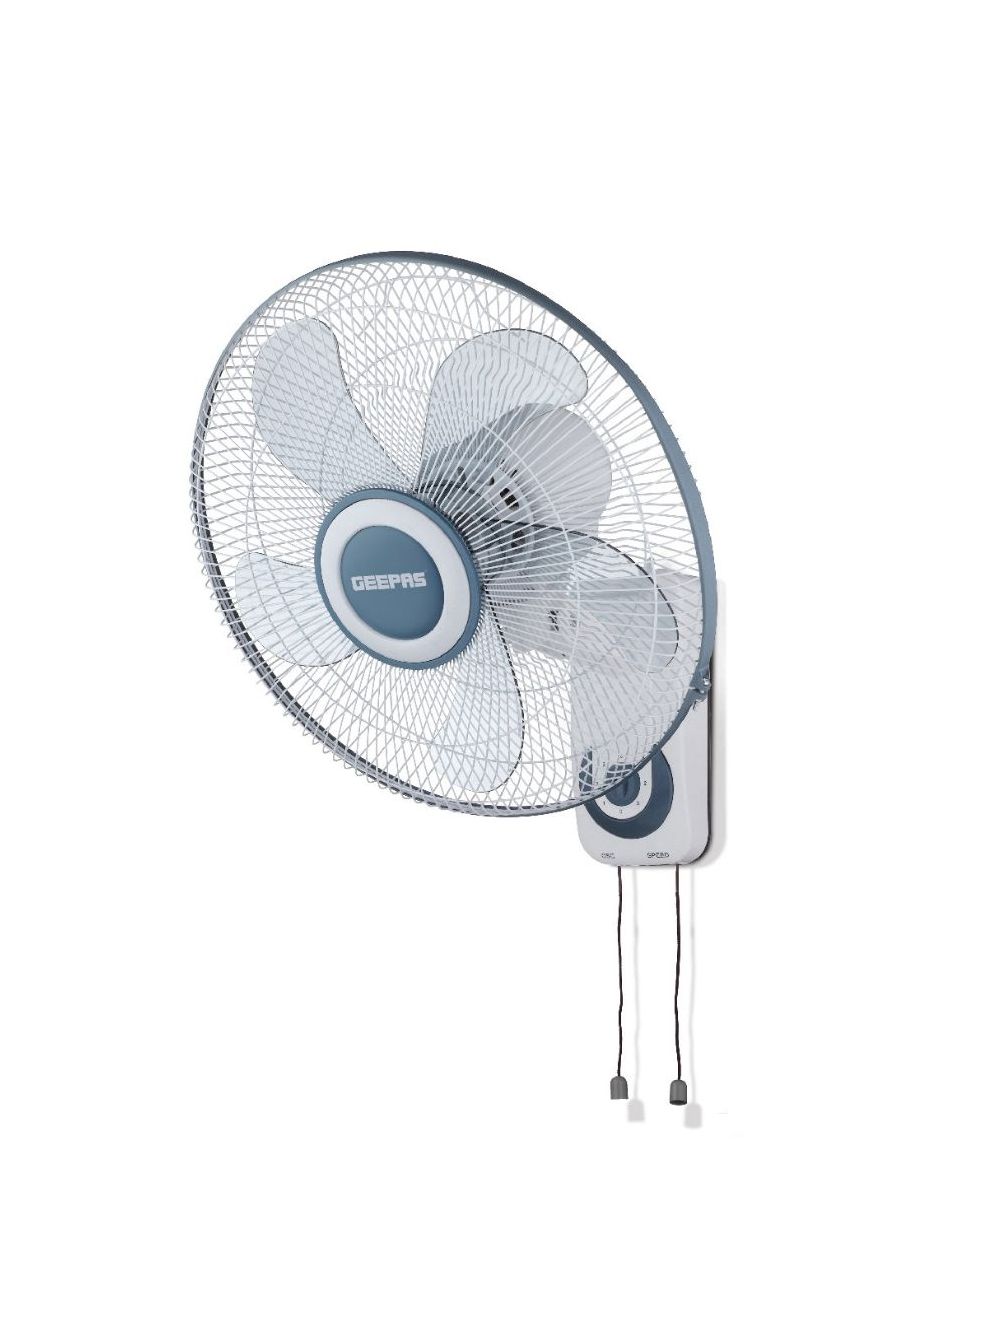 Geepas Electric - Wall Mount Fans - GF9483